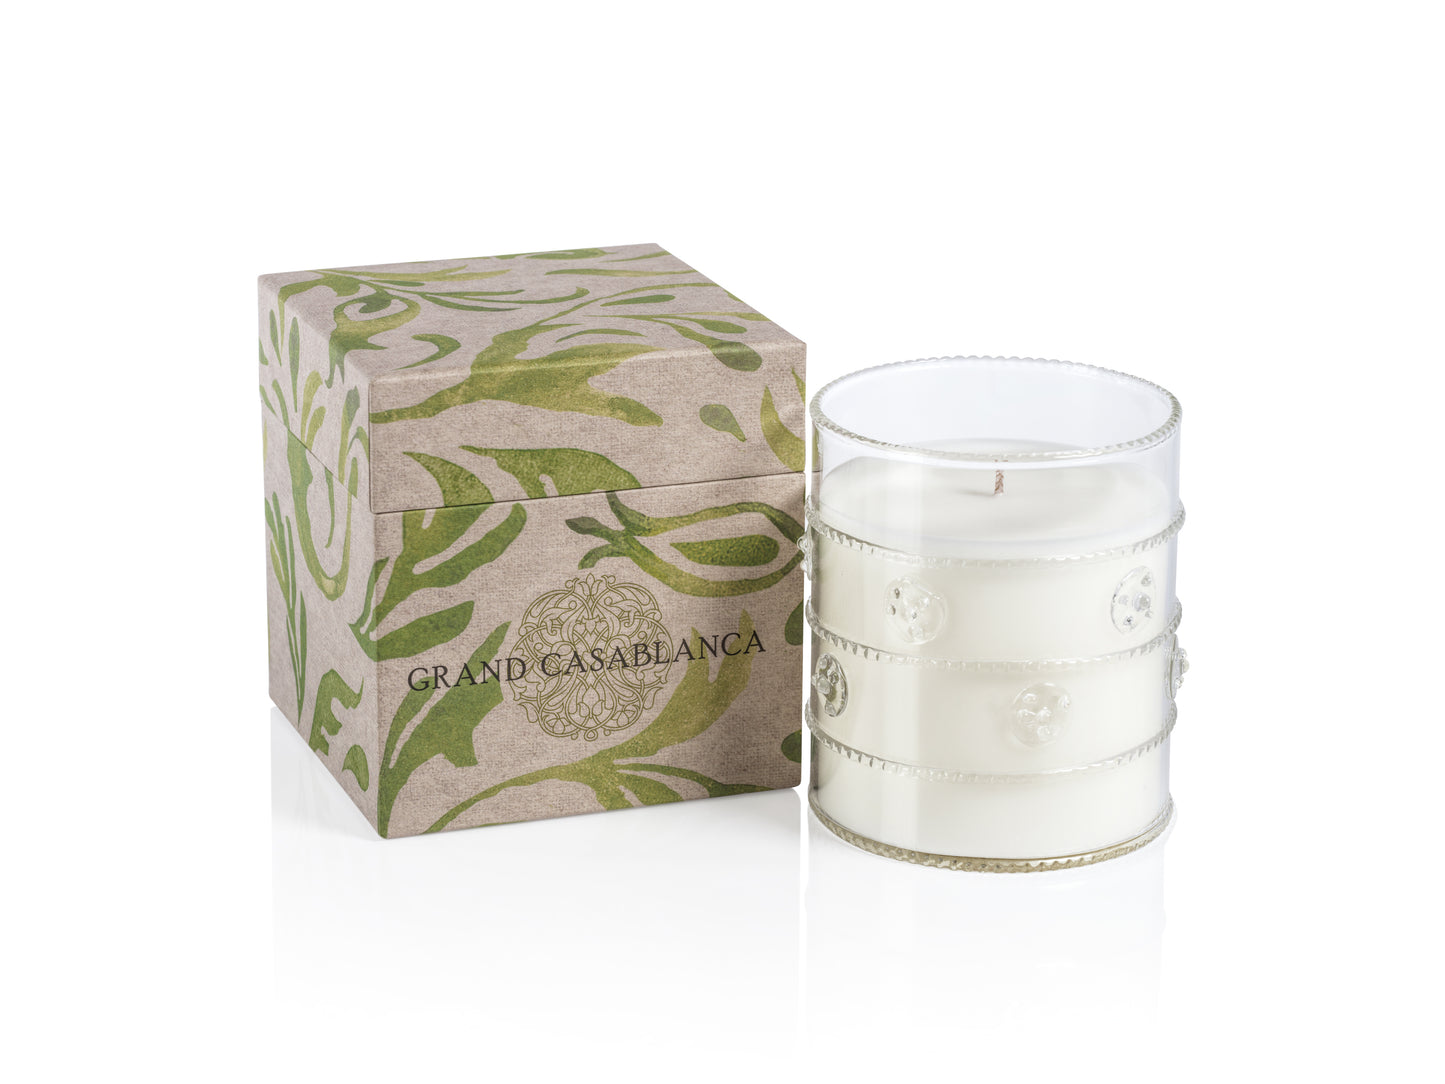 LILY of the VALLEY Zodax Grand Casablanca Scented Candle 12 oz - Gift Boxed